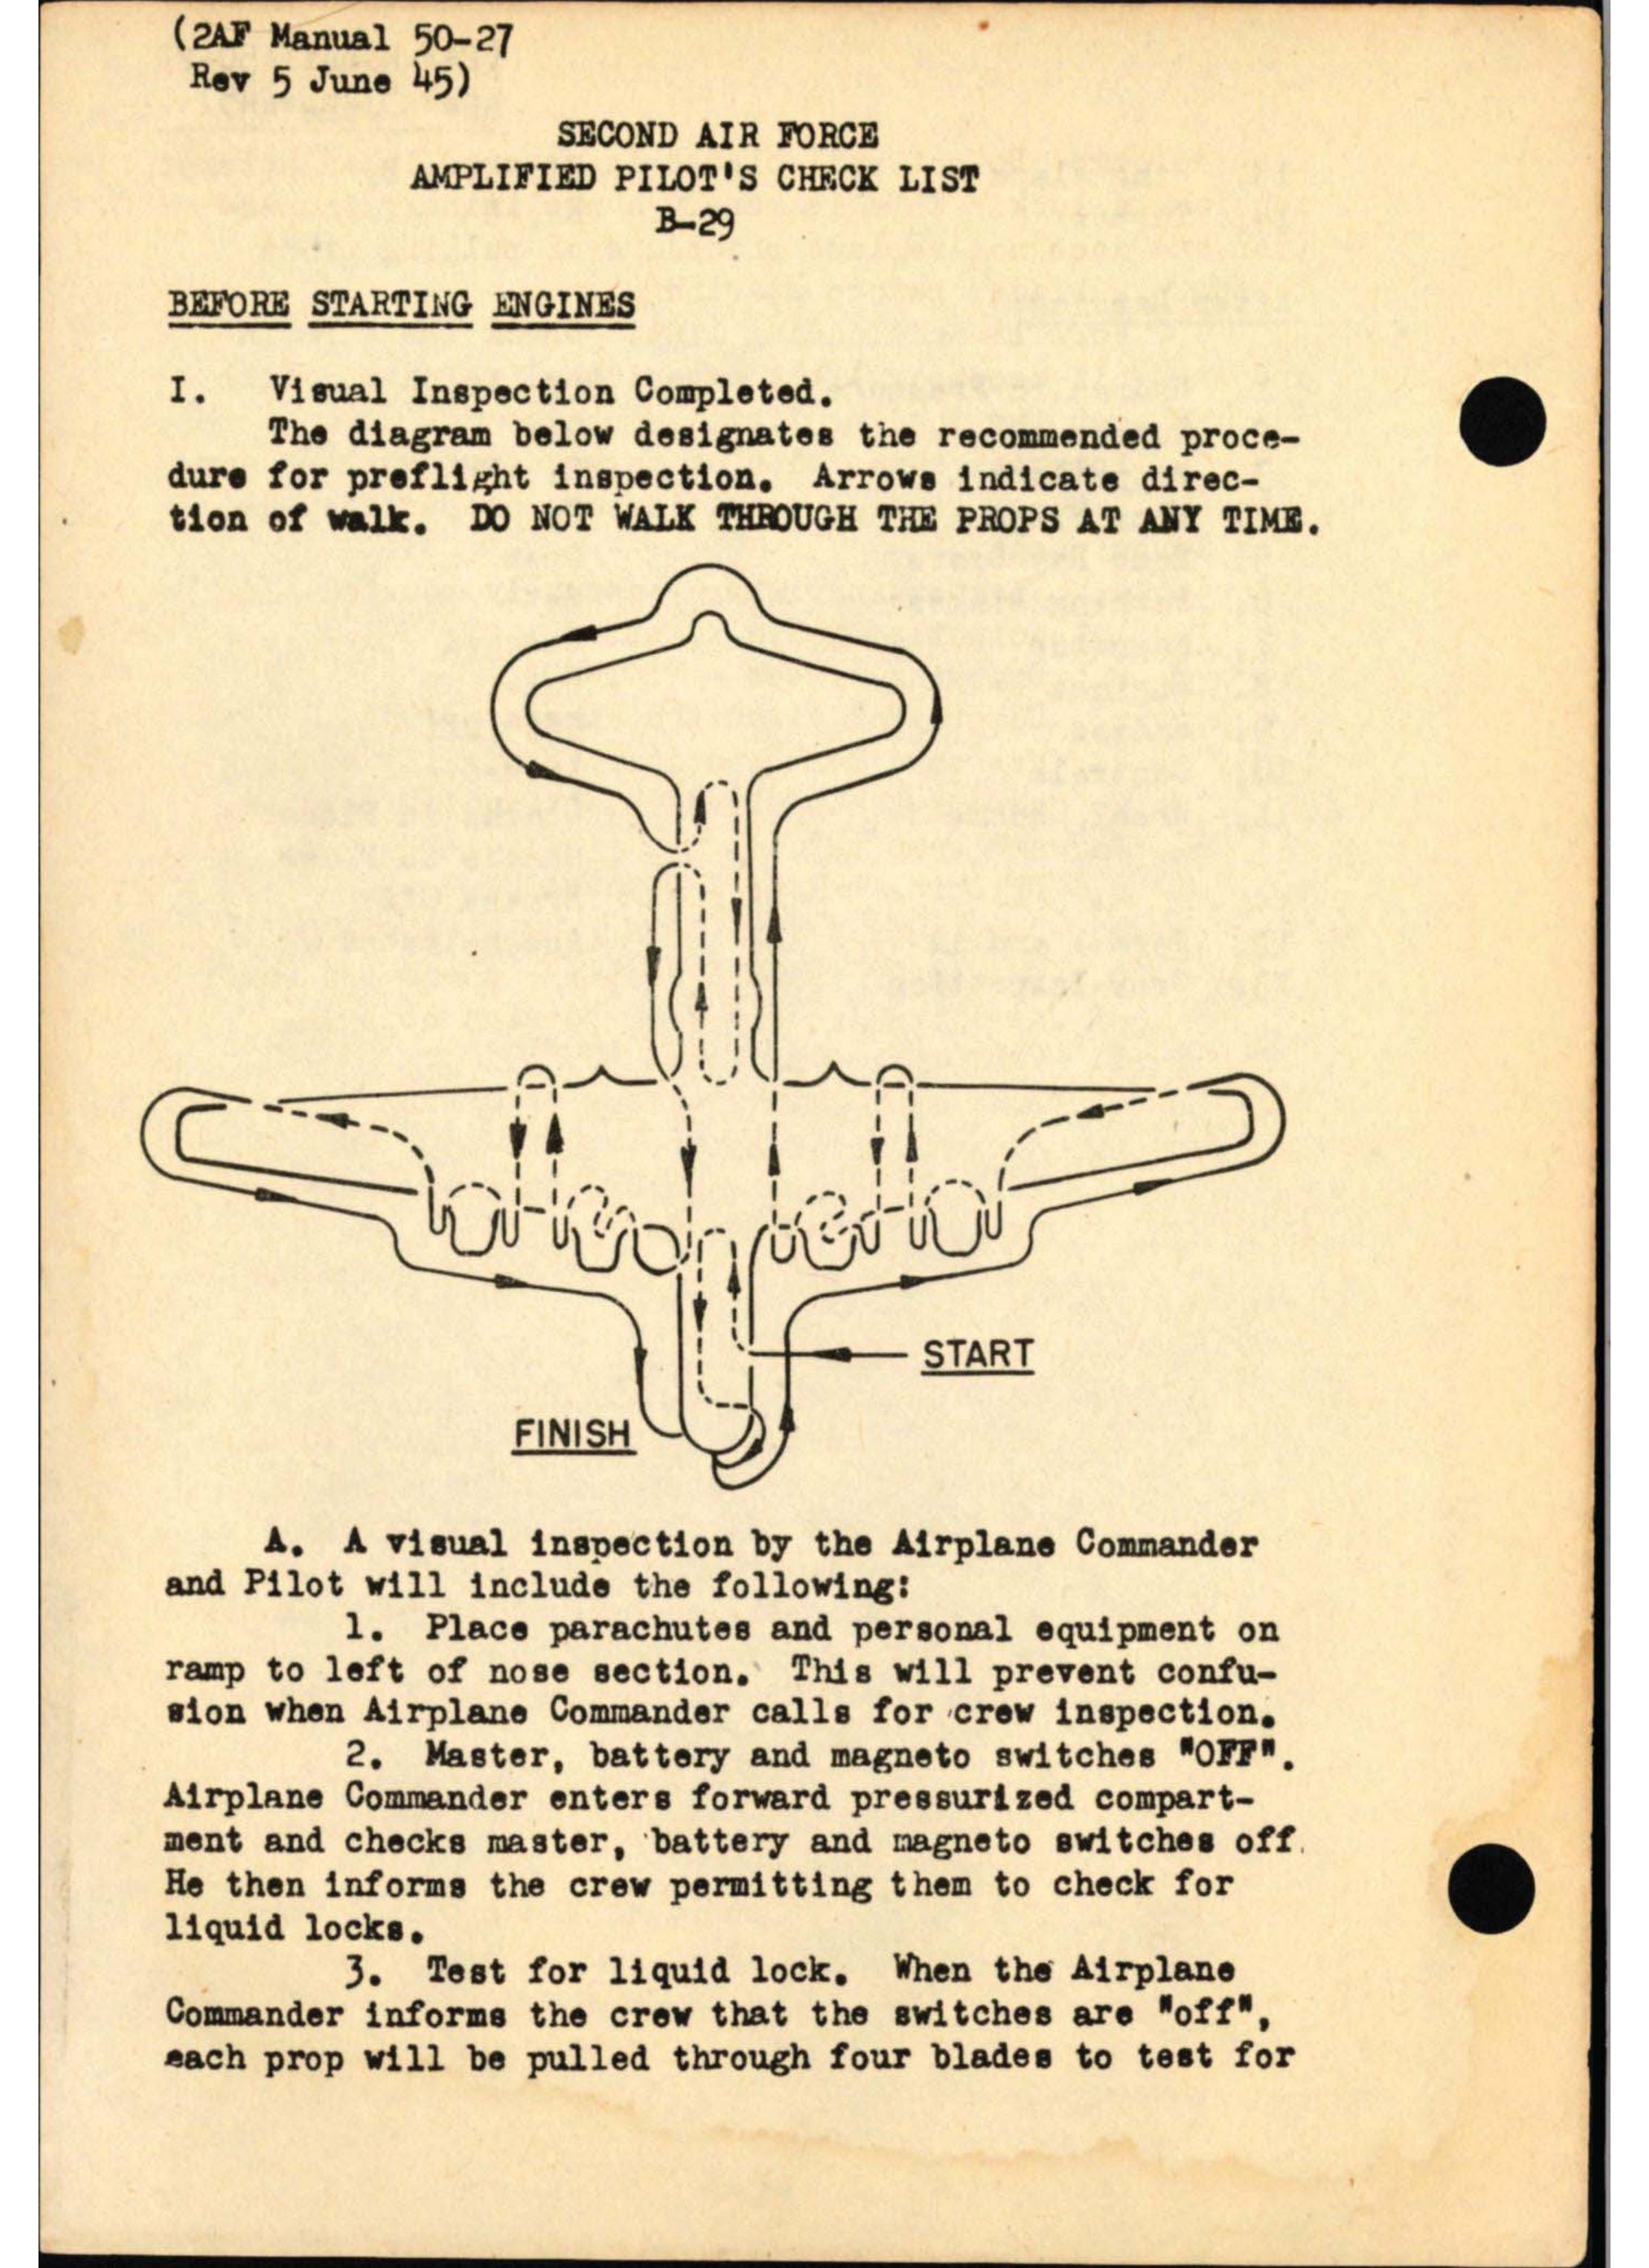 Sample page  9 from AirCorps Library document: B-29 Standard Procedures for Pilots, Second Air Force